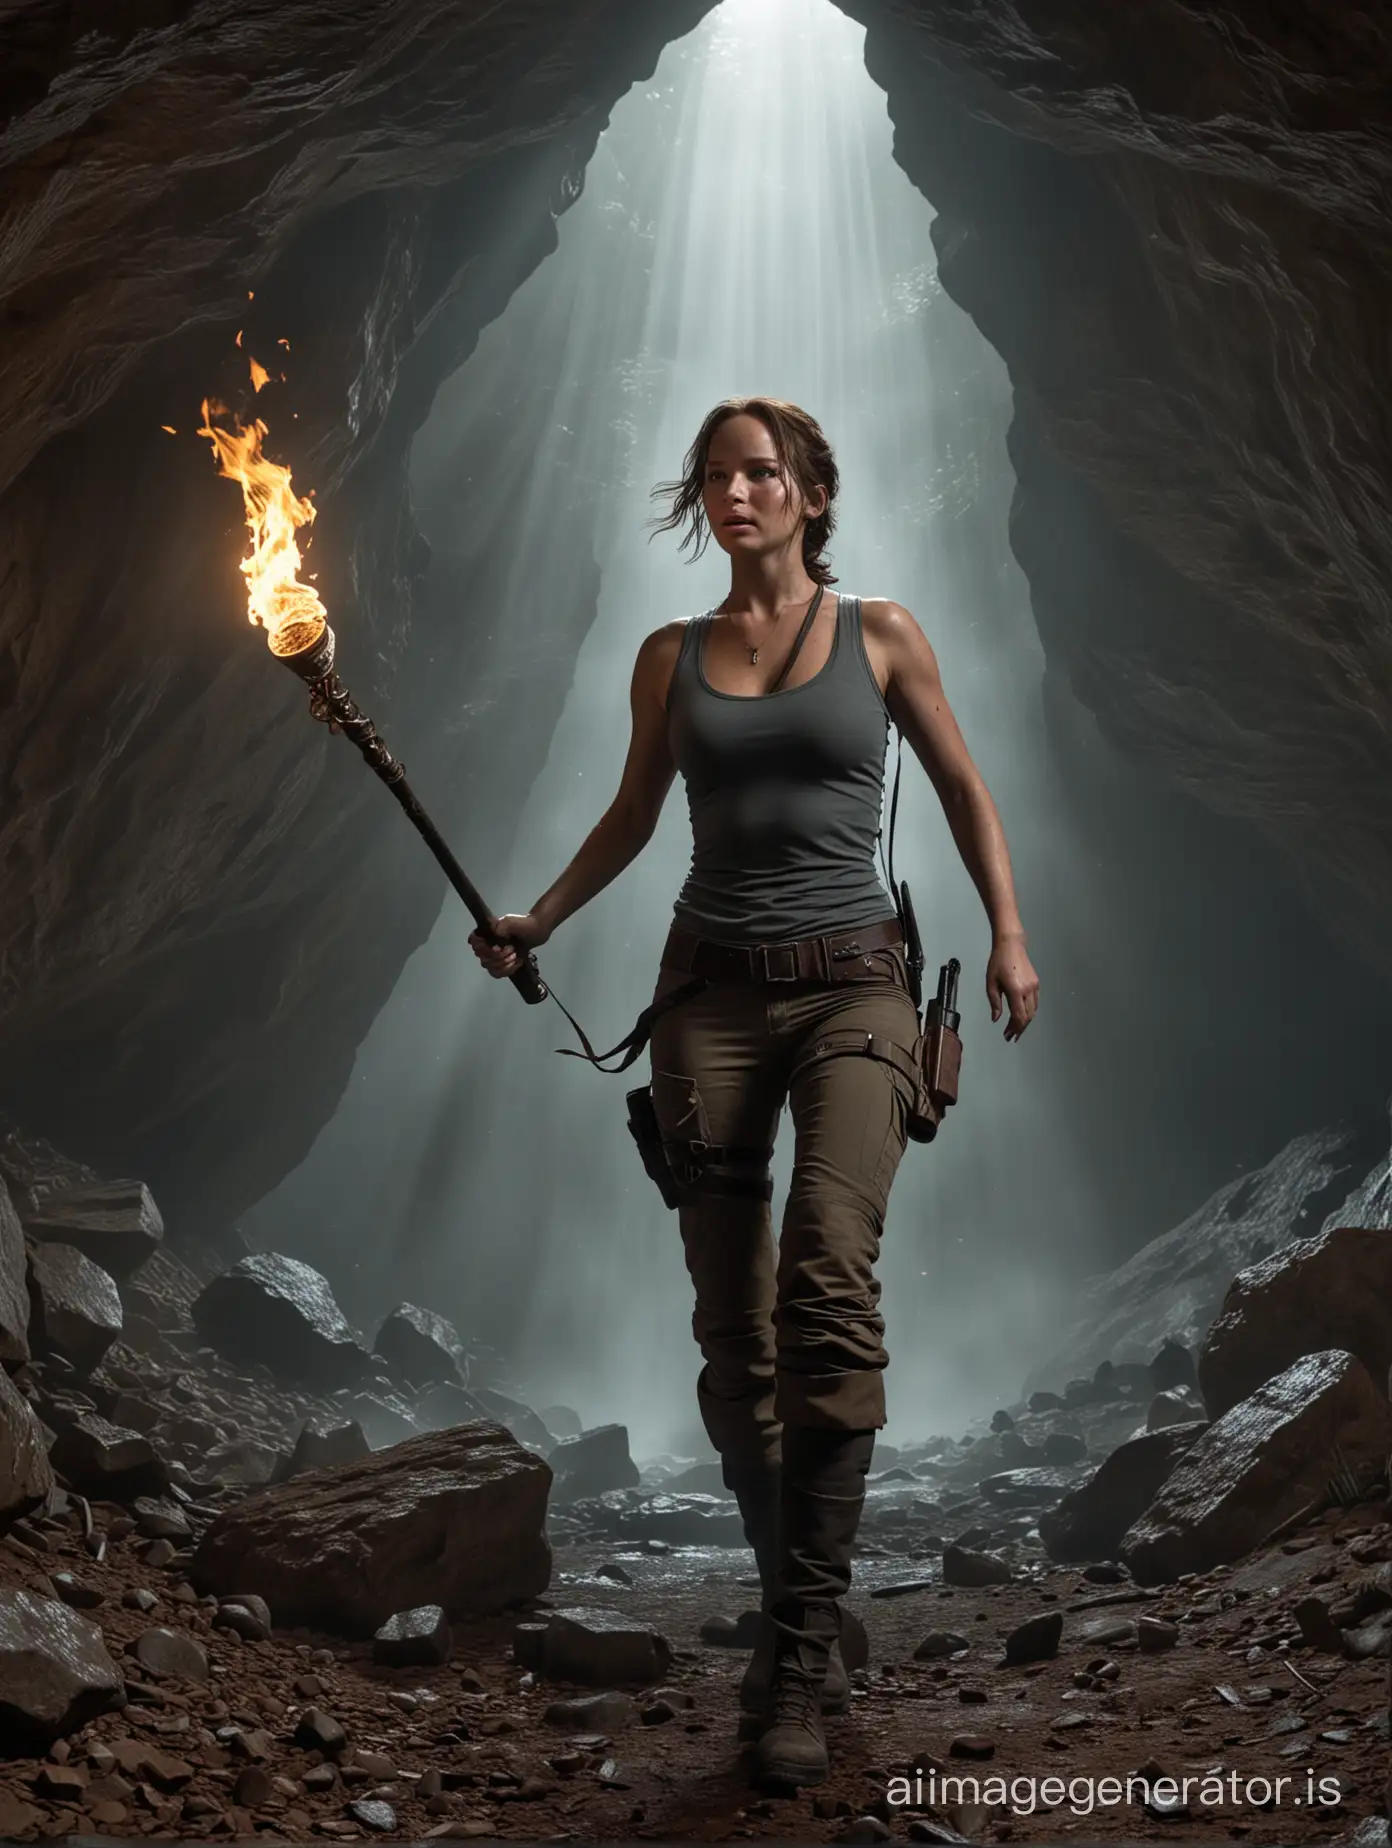 Jennifer-Lawrence-as-Lara-Croft-Explores-Cave-with-Torch